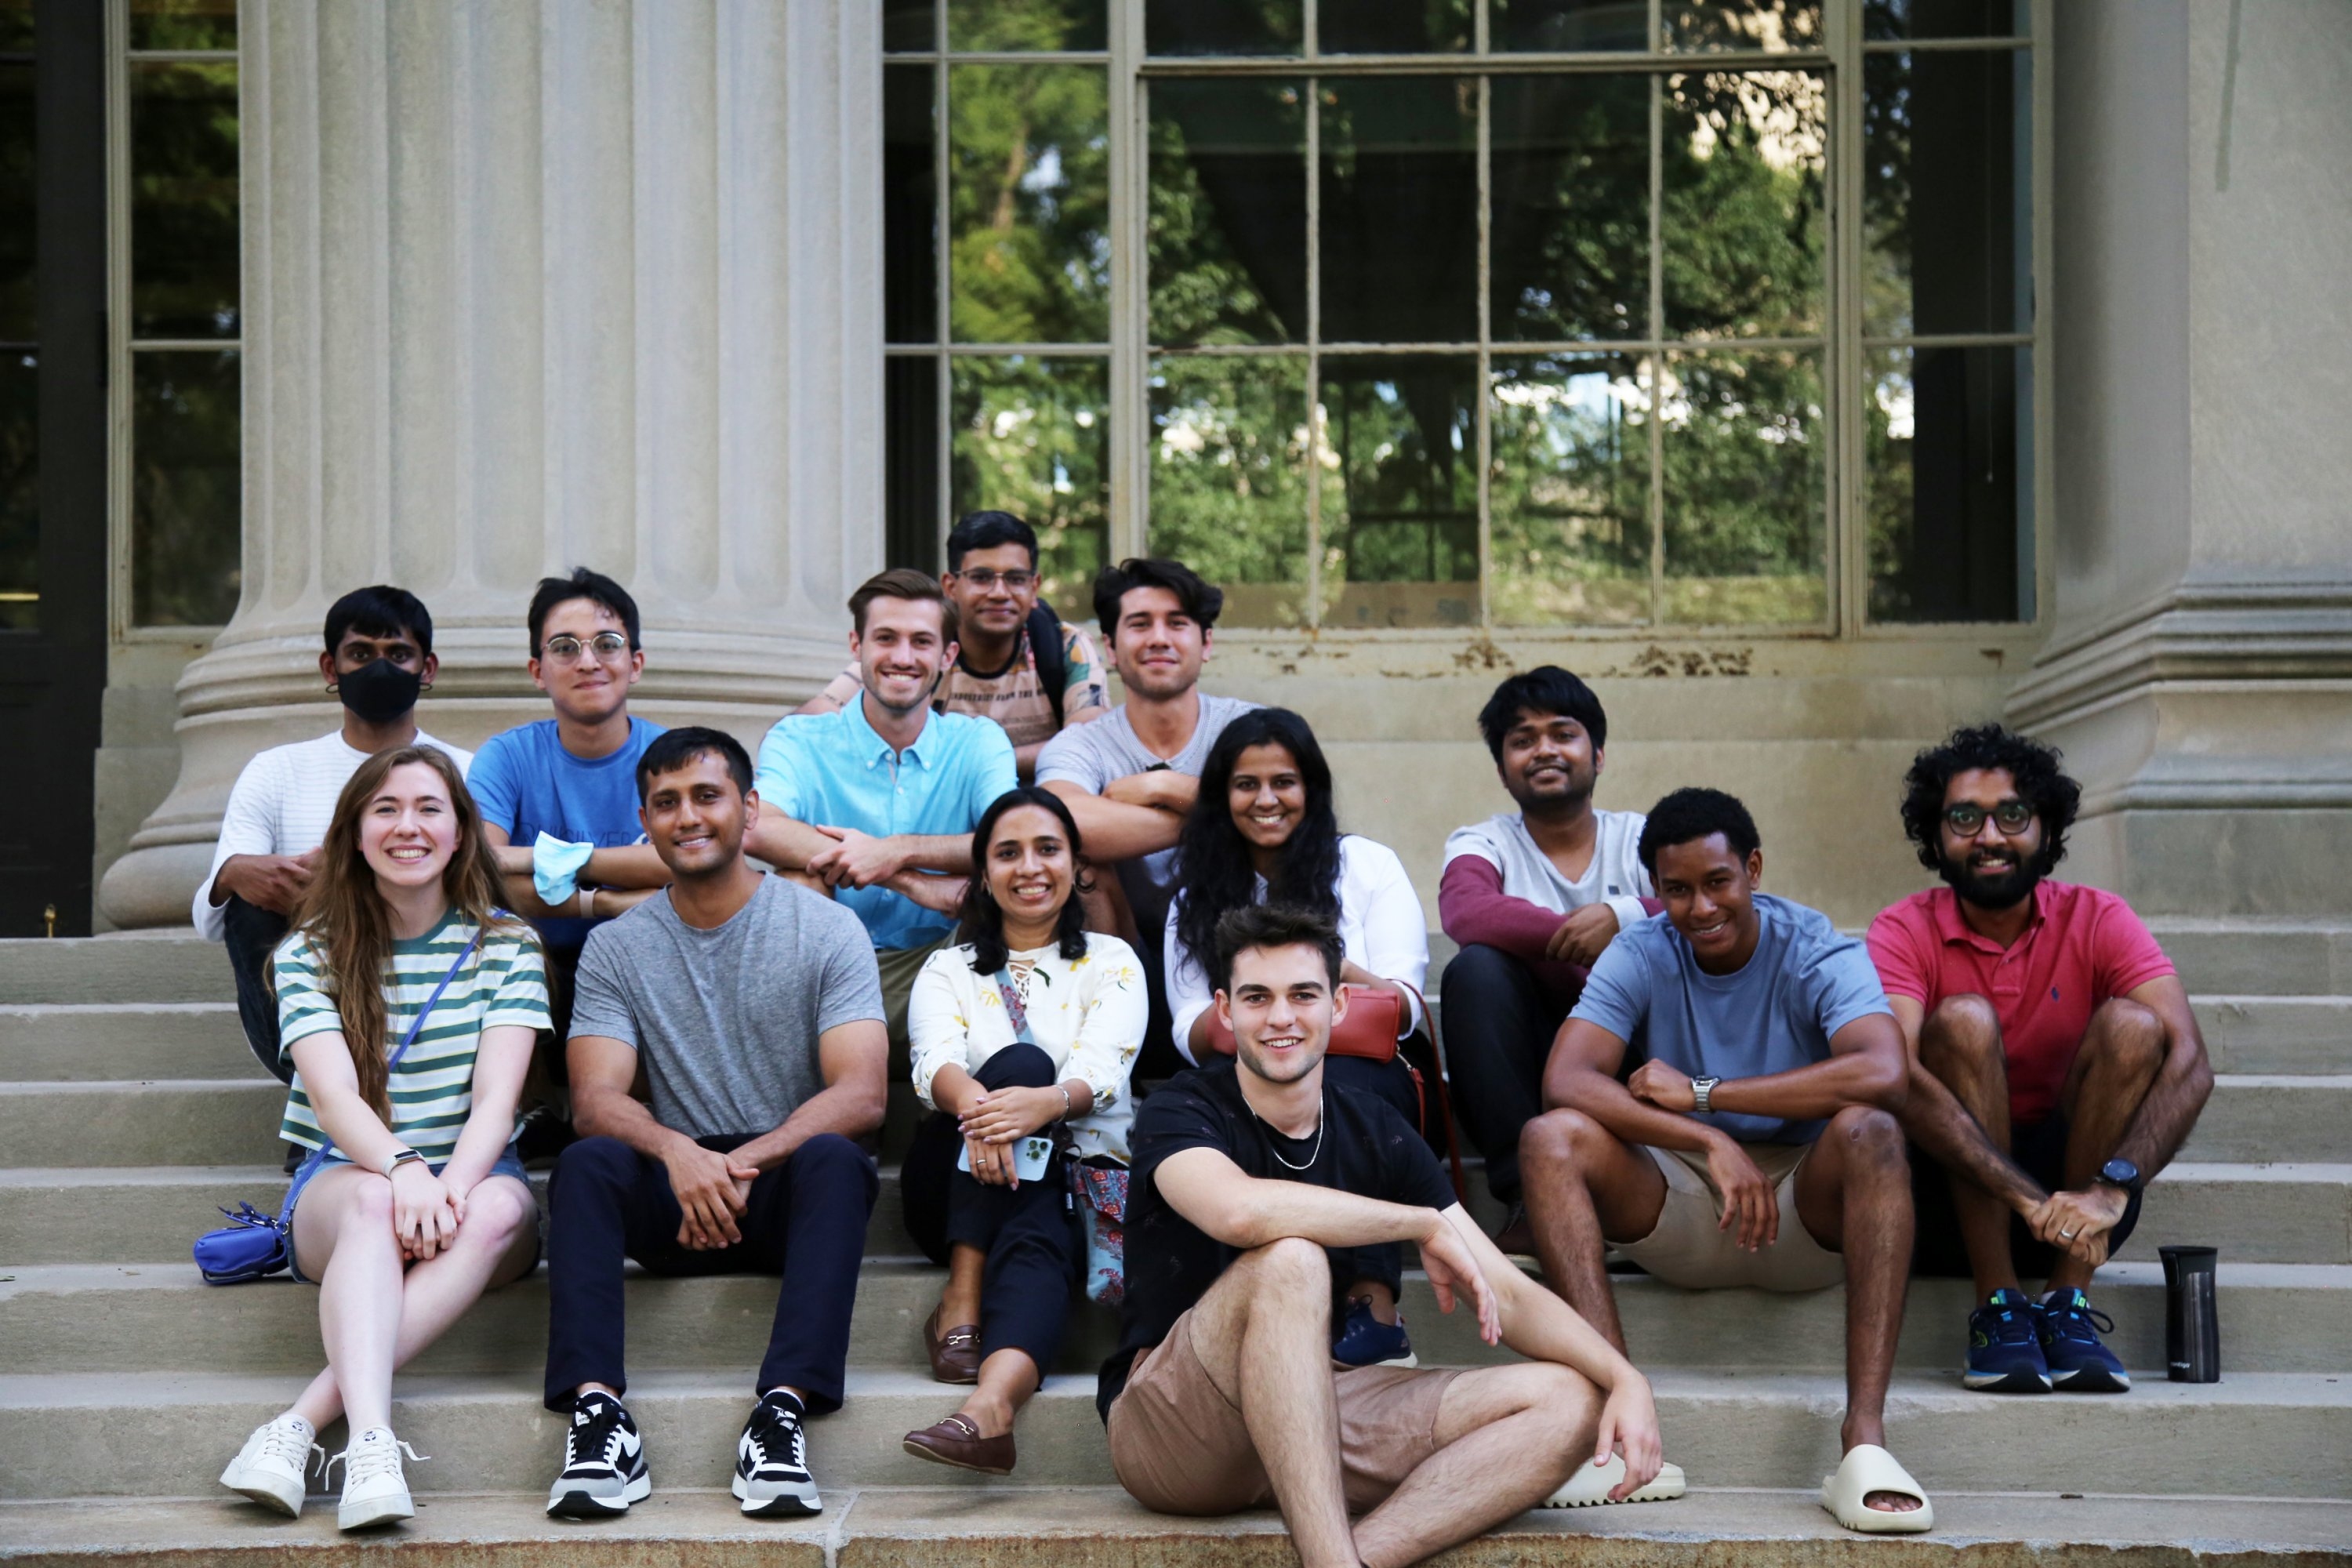 Grad students had the opportunity to meet new friends across departments at the Aug. 21 picnic, and to reinforce connections within their programs.